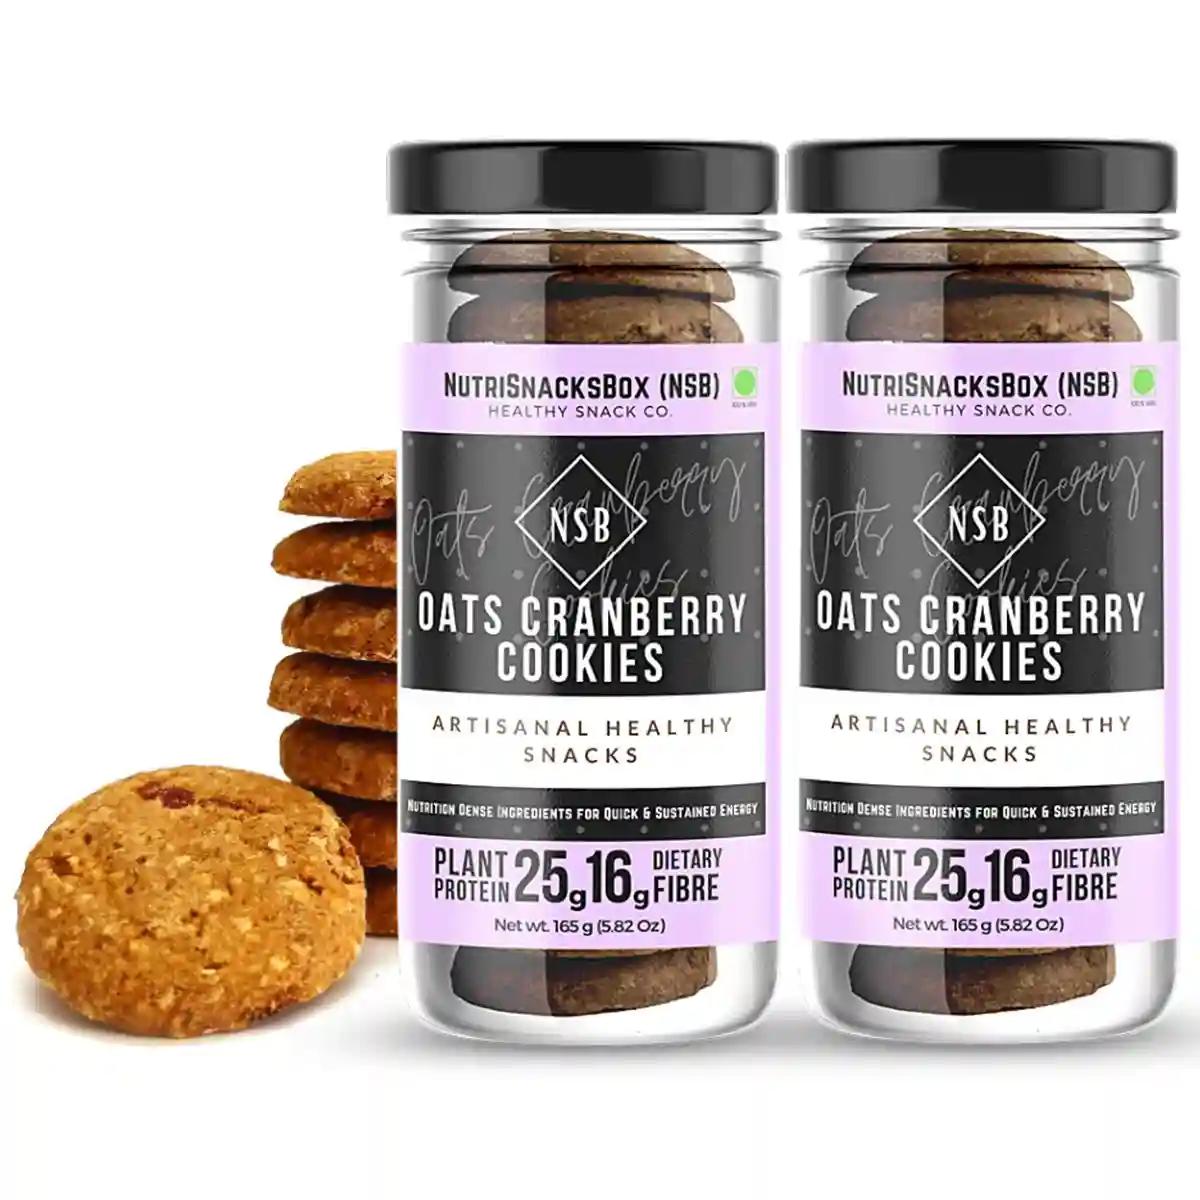 Nutrisnacksbox Oats & Cranberry Protein Cookies Gift Box I Corporate Gifts | Healthy Oatmeal Cookies For Diet | Premium Gift Hamper | Protein & Fiber Rich Cookies I New Year Gift Box I Christmas Gift Hamper I Gifts For Xmas